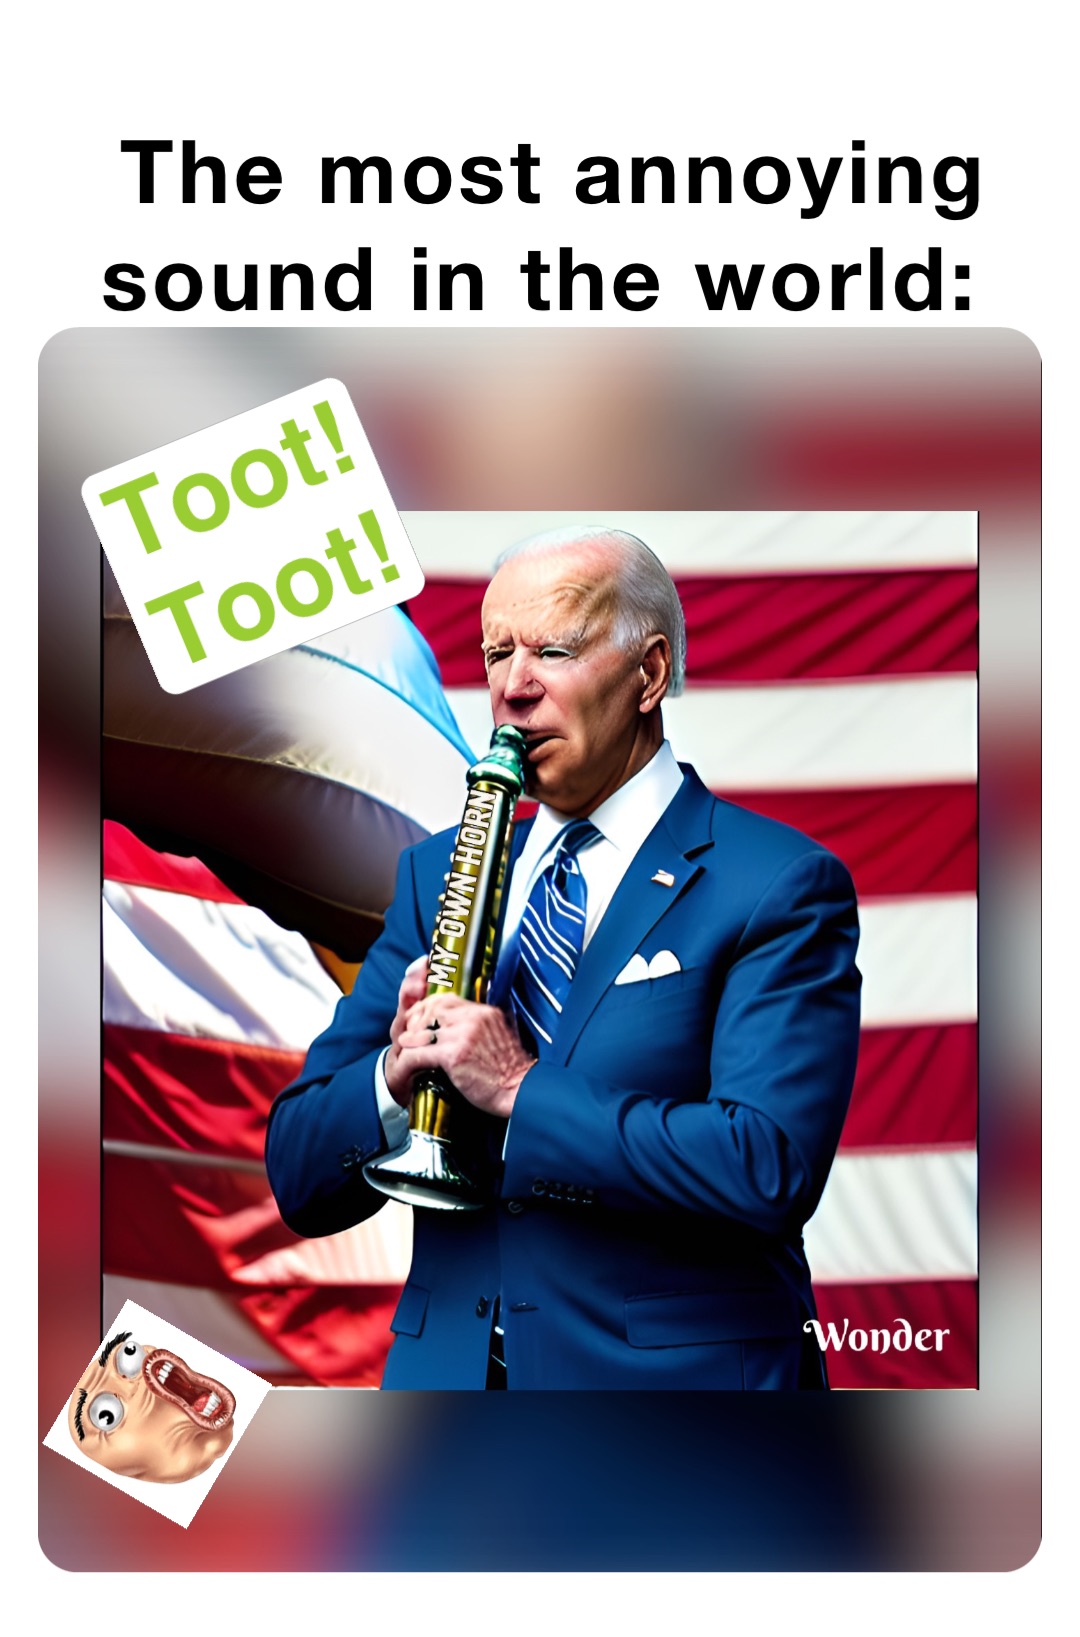 The most annoying sound in the world: Toot!
Toot!